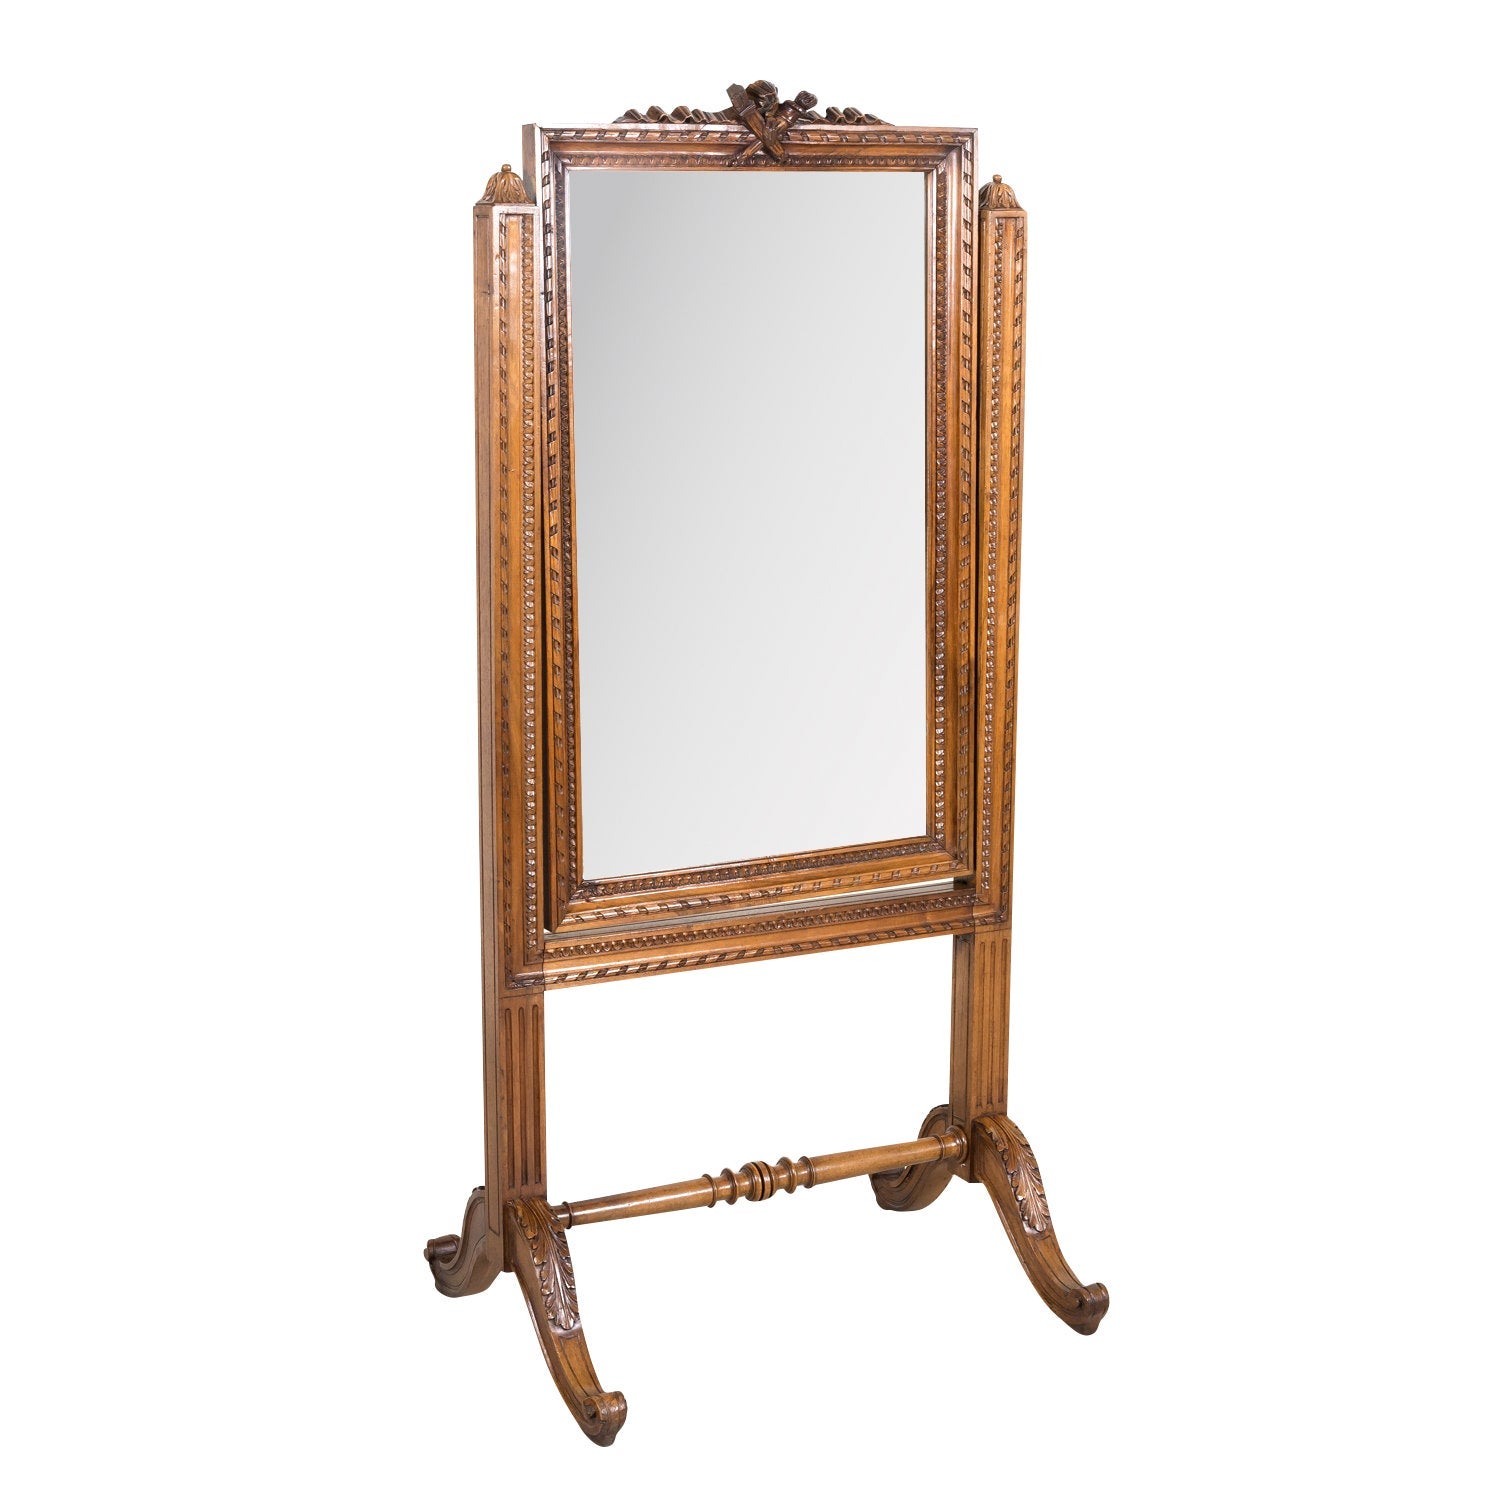 Exceptional 19th Century French Louis XVI Style Carved Walnut Cheval Mirror For Sale